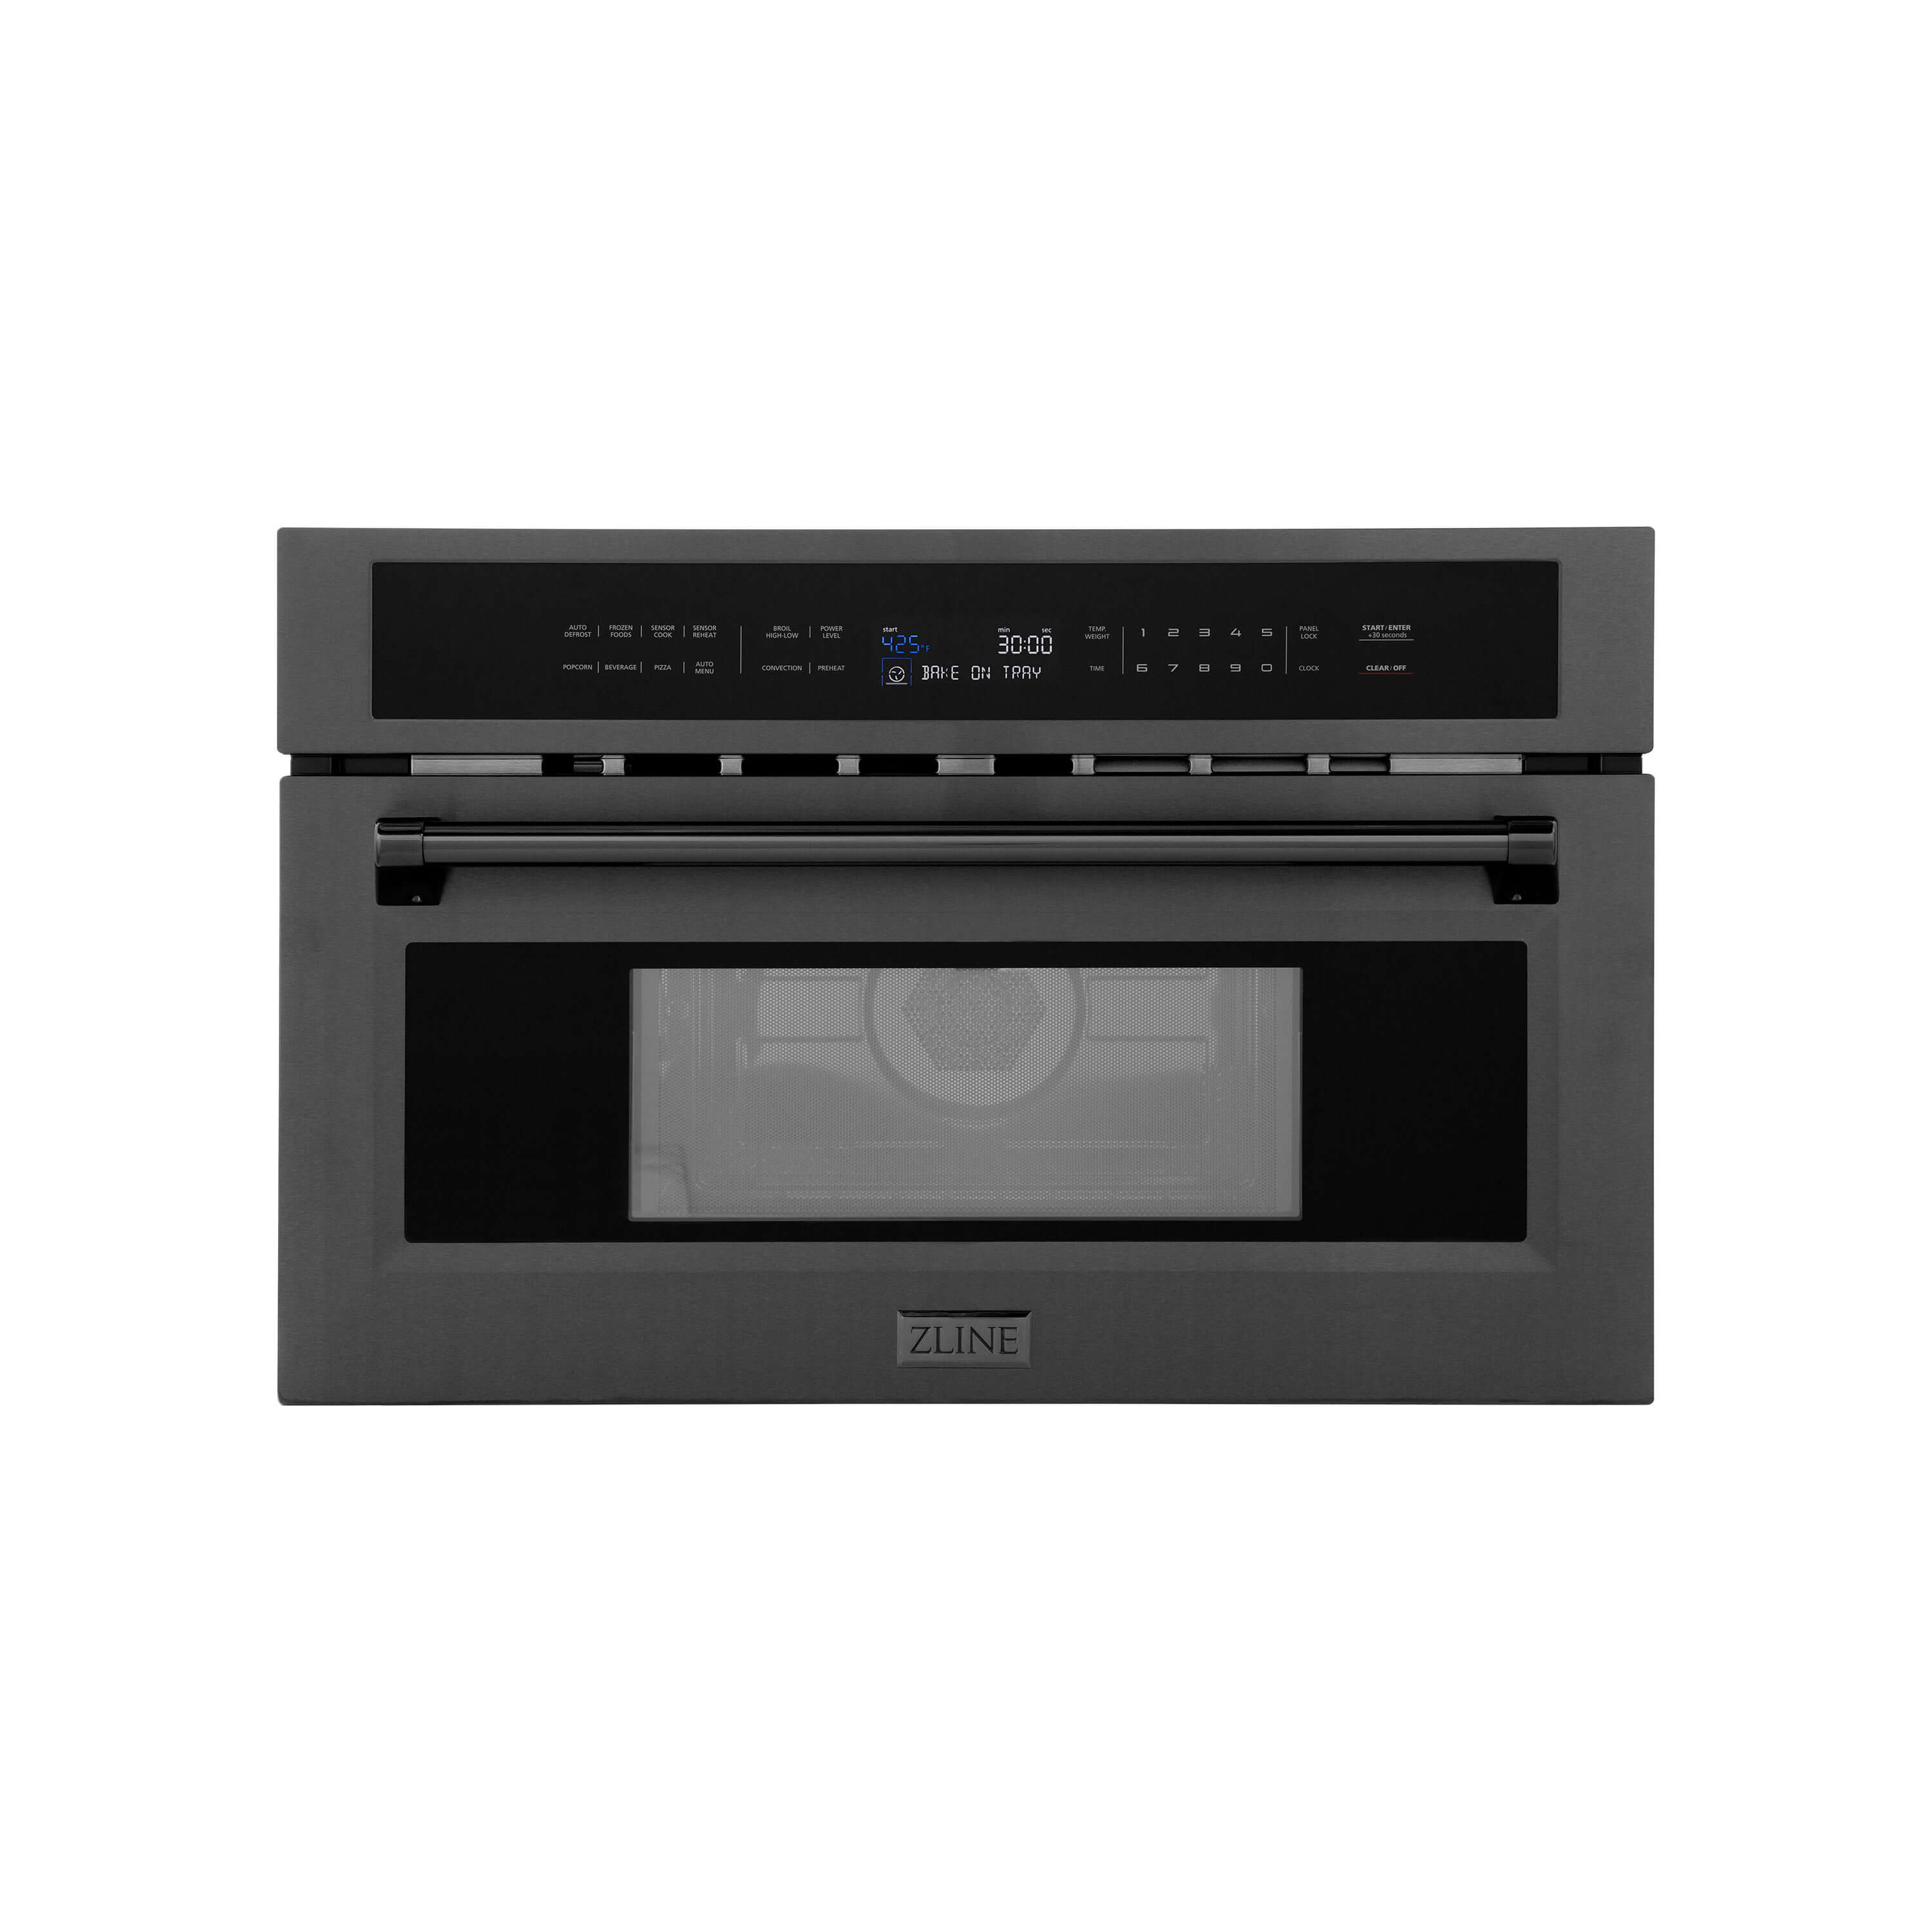 ZLINE 30 in. 1.6 cu ft. Black Stainless Steel Built-in Convection Microwave Oven (MWO-30-BS) Front View Door Closed